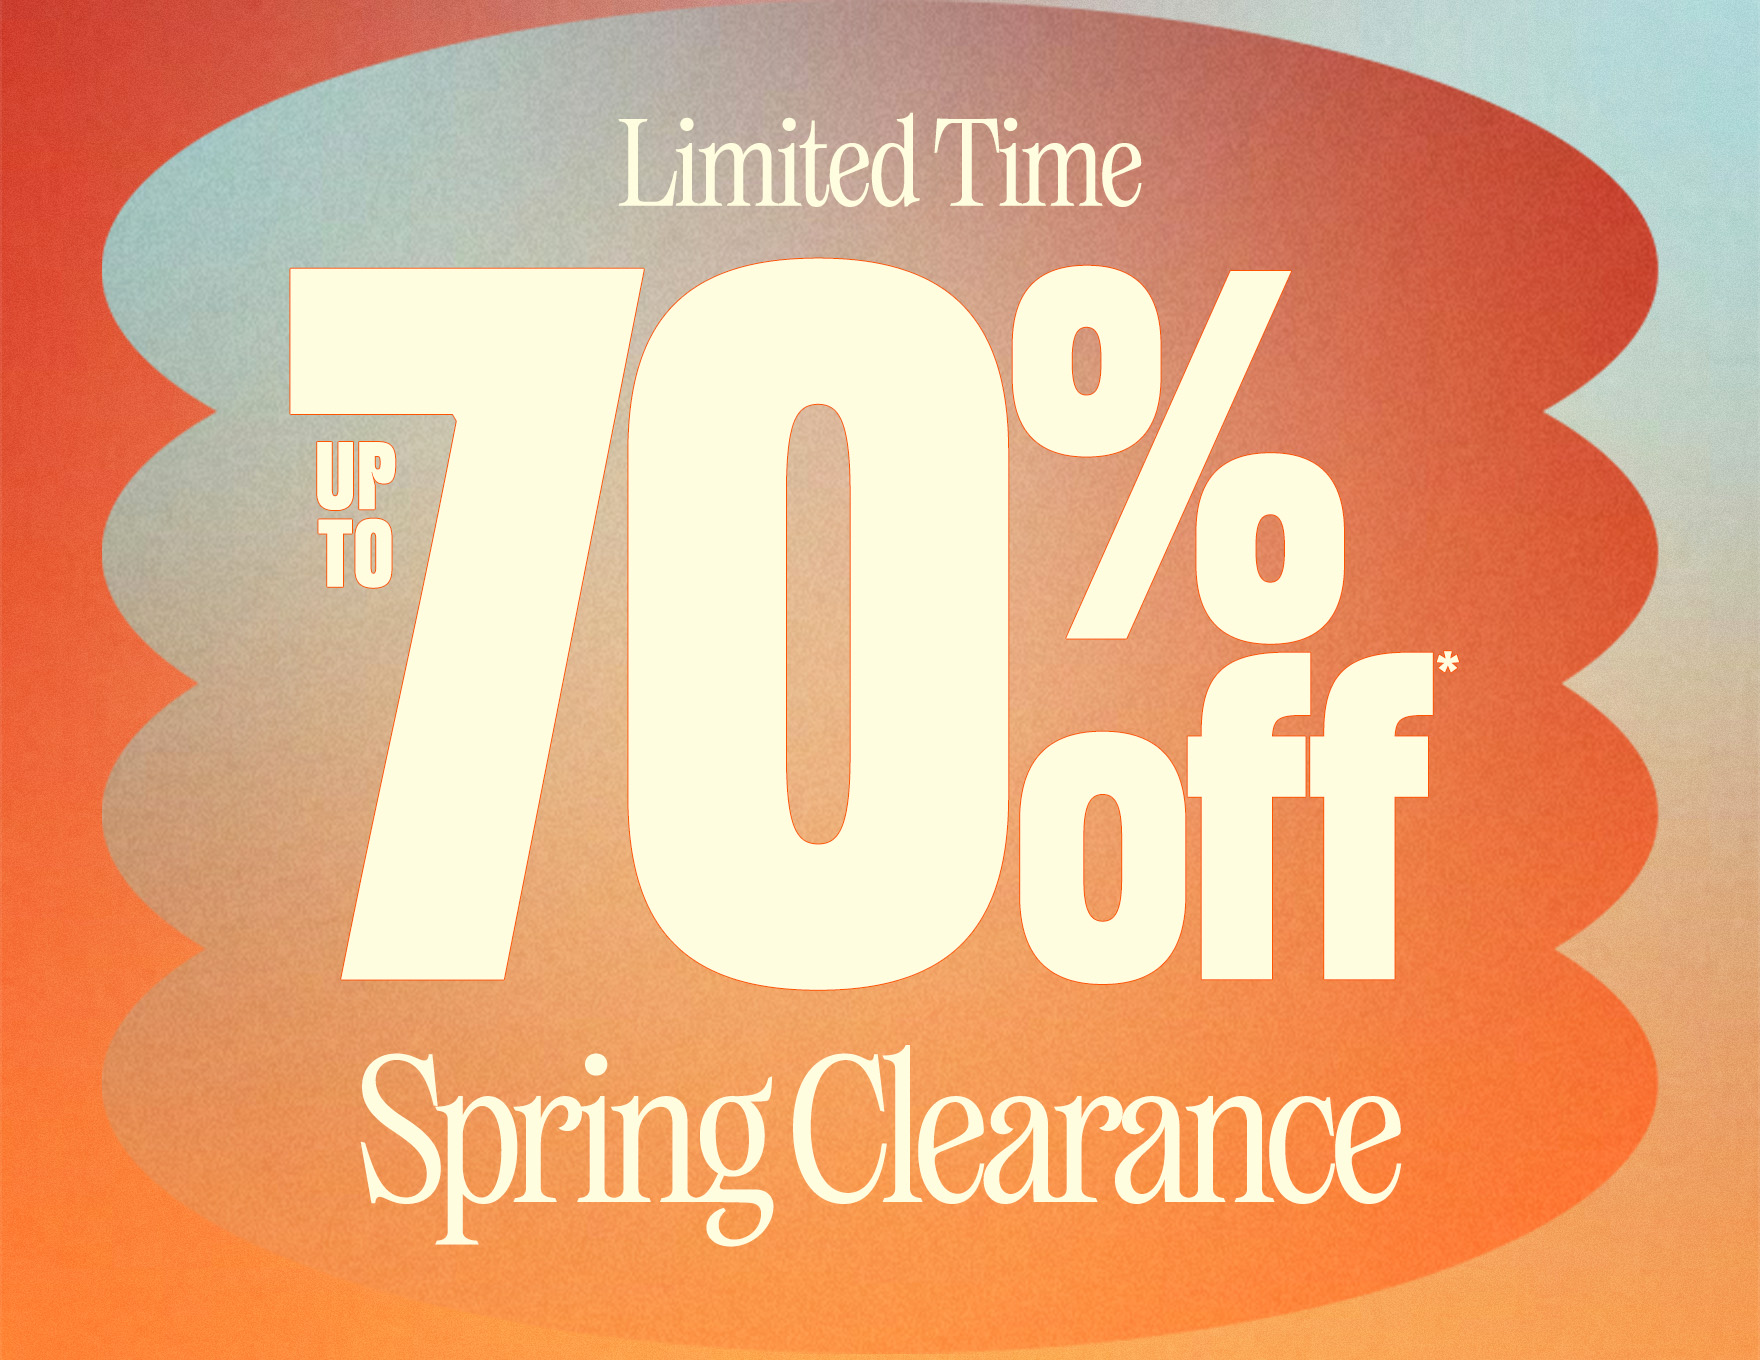 Up To 70% Off* Spring Clearance